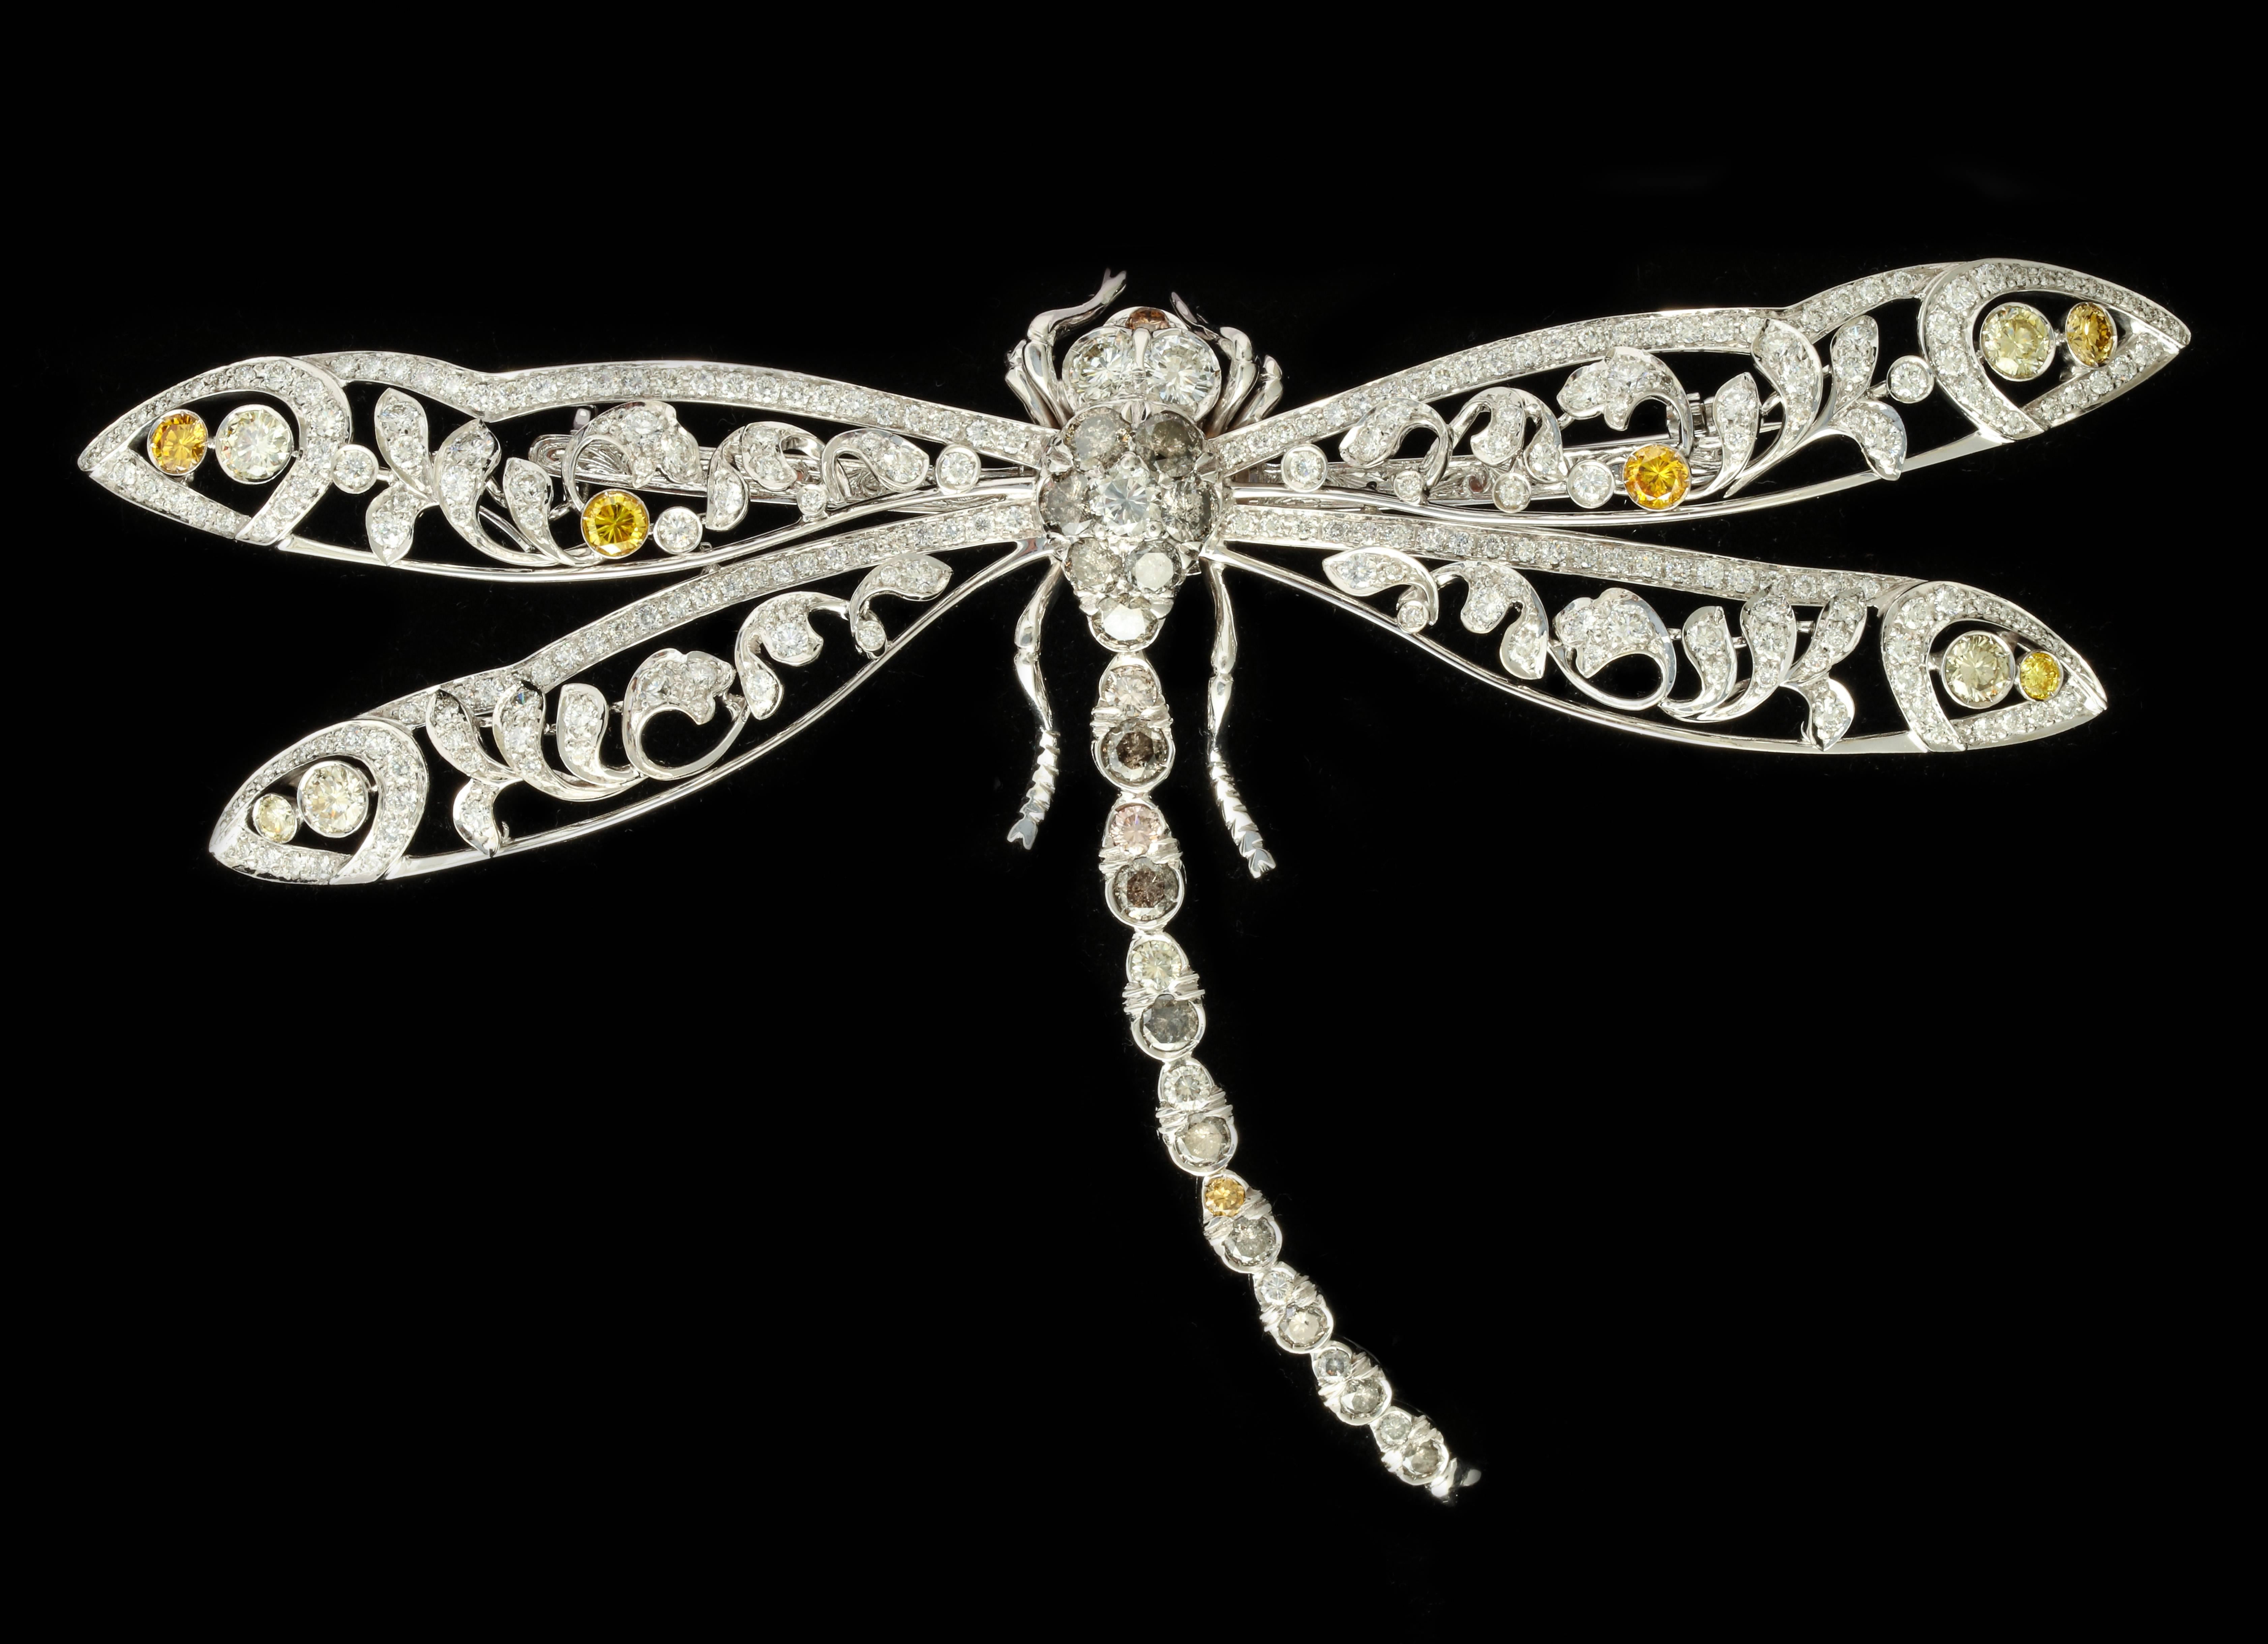 This stunning dragonfly is bold in size, yet light and delicate thanks to the intricate openwork design.  The 10cts of diamonds include bright, white stones as well as some shades of brown, grey and some treated yellows.  The combination is as